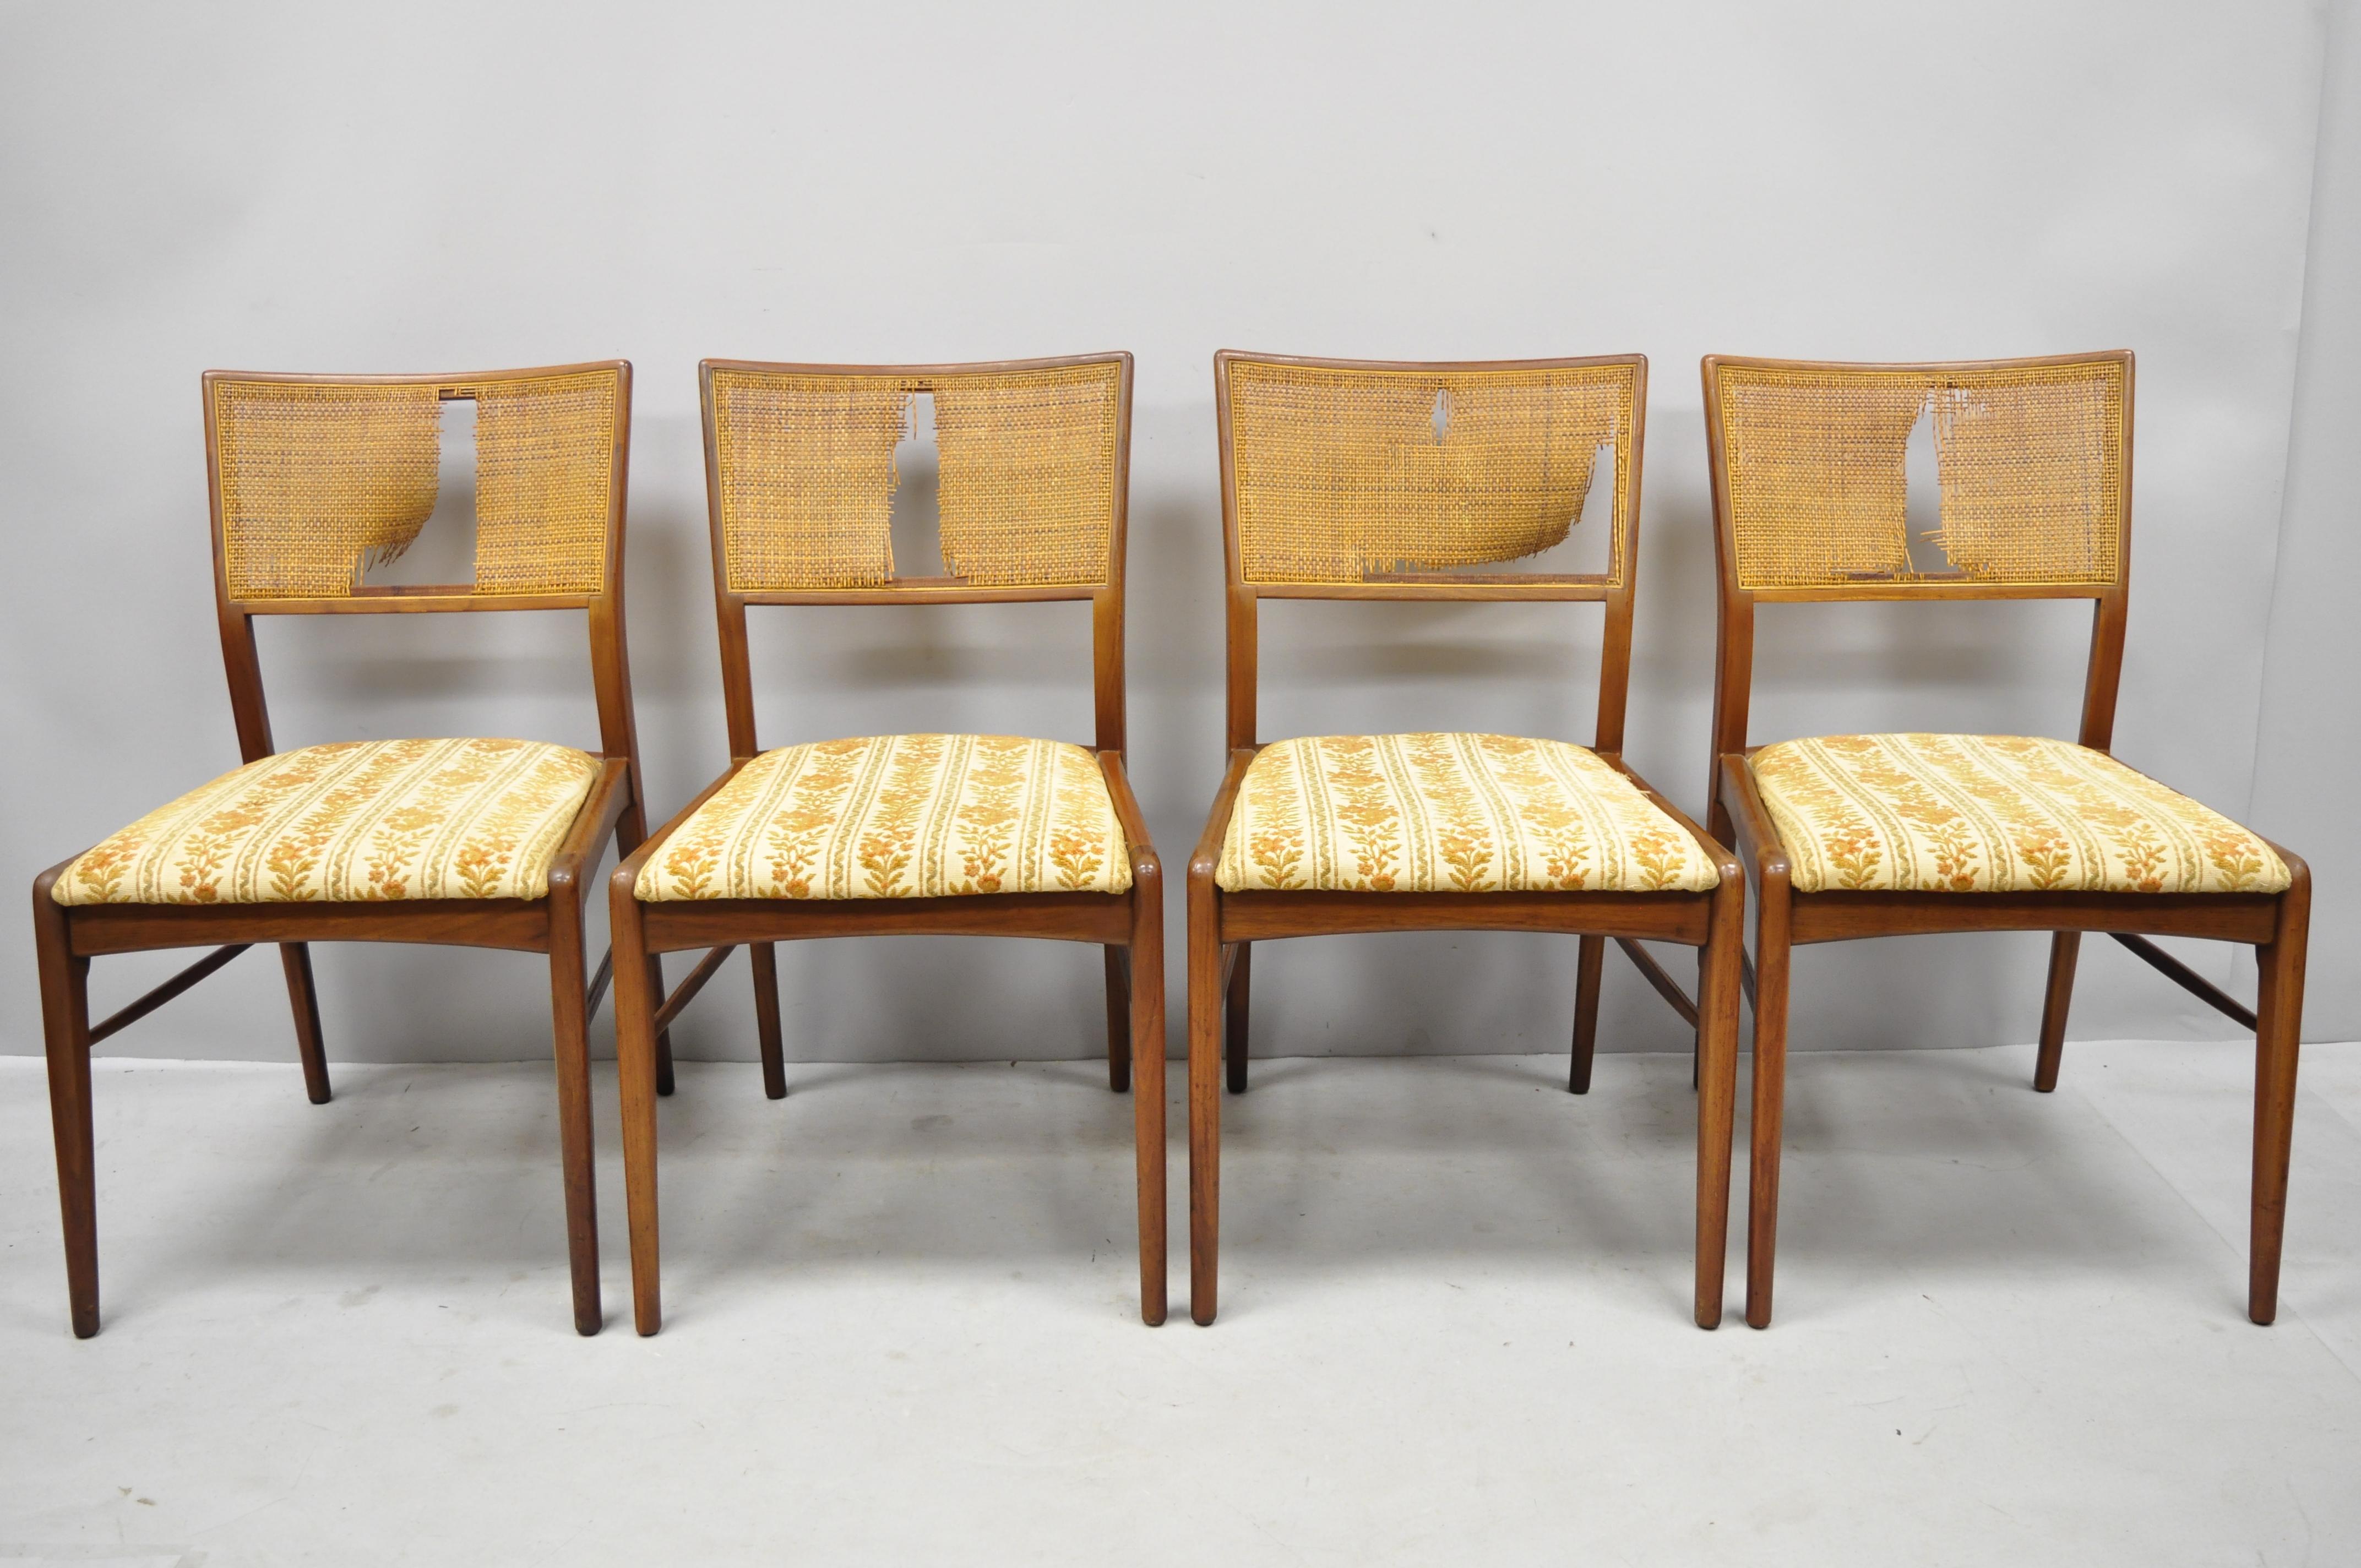 4 Danish Mid-Century Modern walnut cane back dining chairs after TH Robsjohn Gibbings. Items feature cane backs, solid wood construction, beautiful wood grain, upholstered seat, tapered legs, sleek sculptural, circa 1960. Measurements: 32